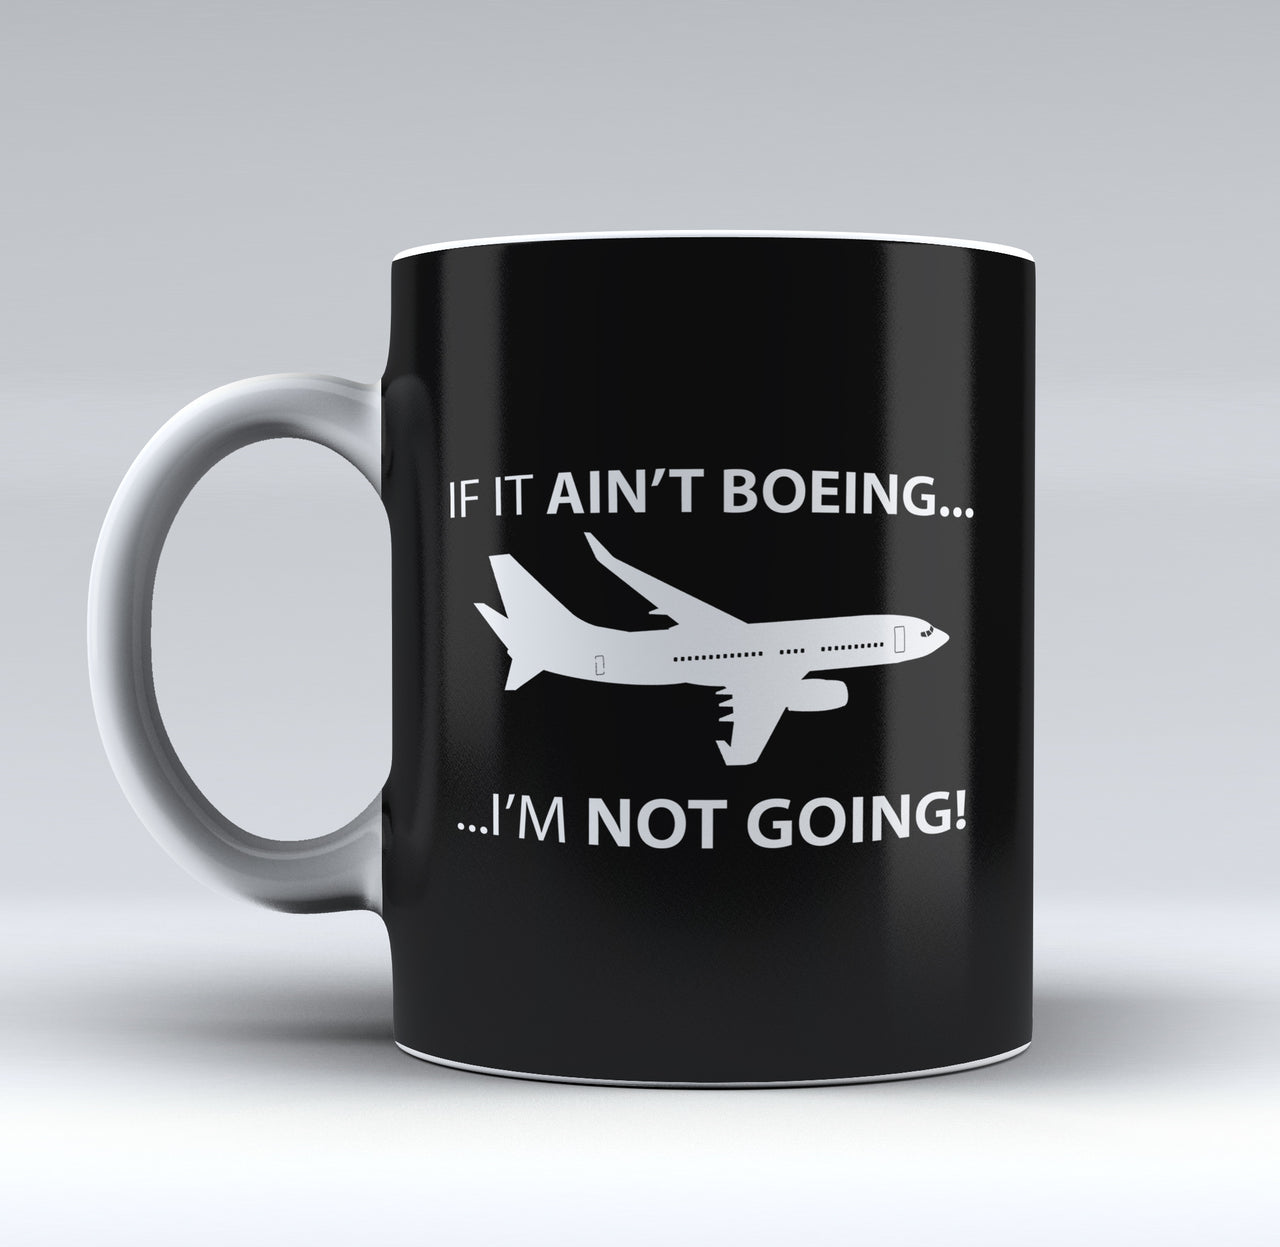 If It Ain't Boeing I'm Not Going! Designed Mugs